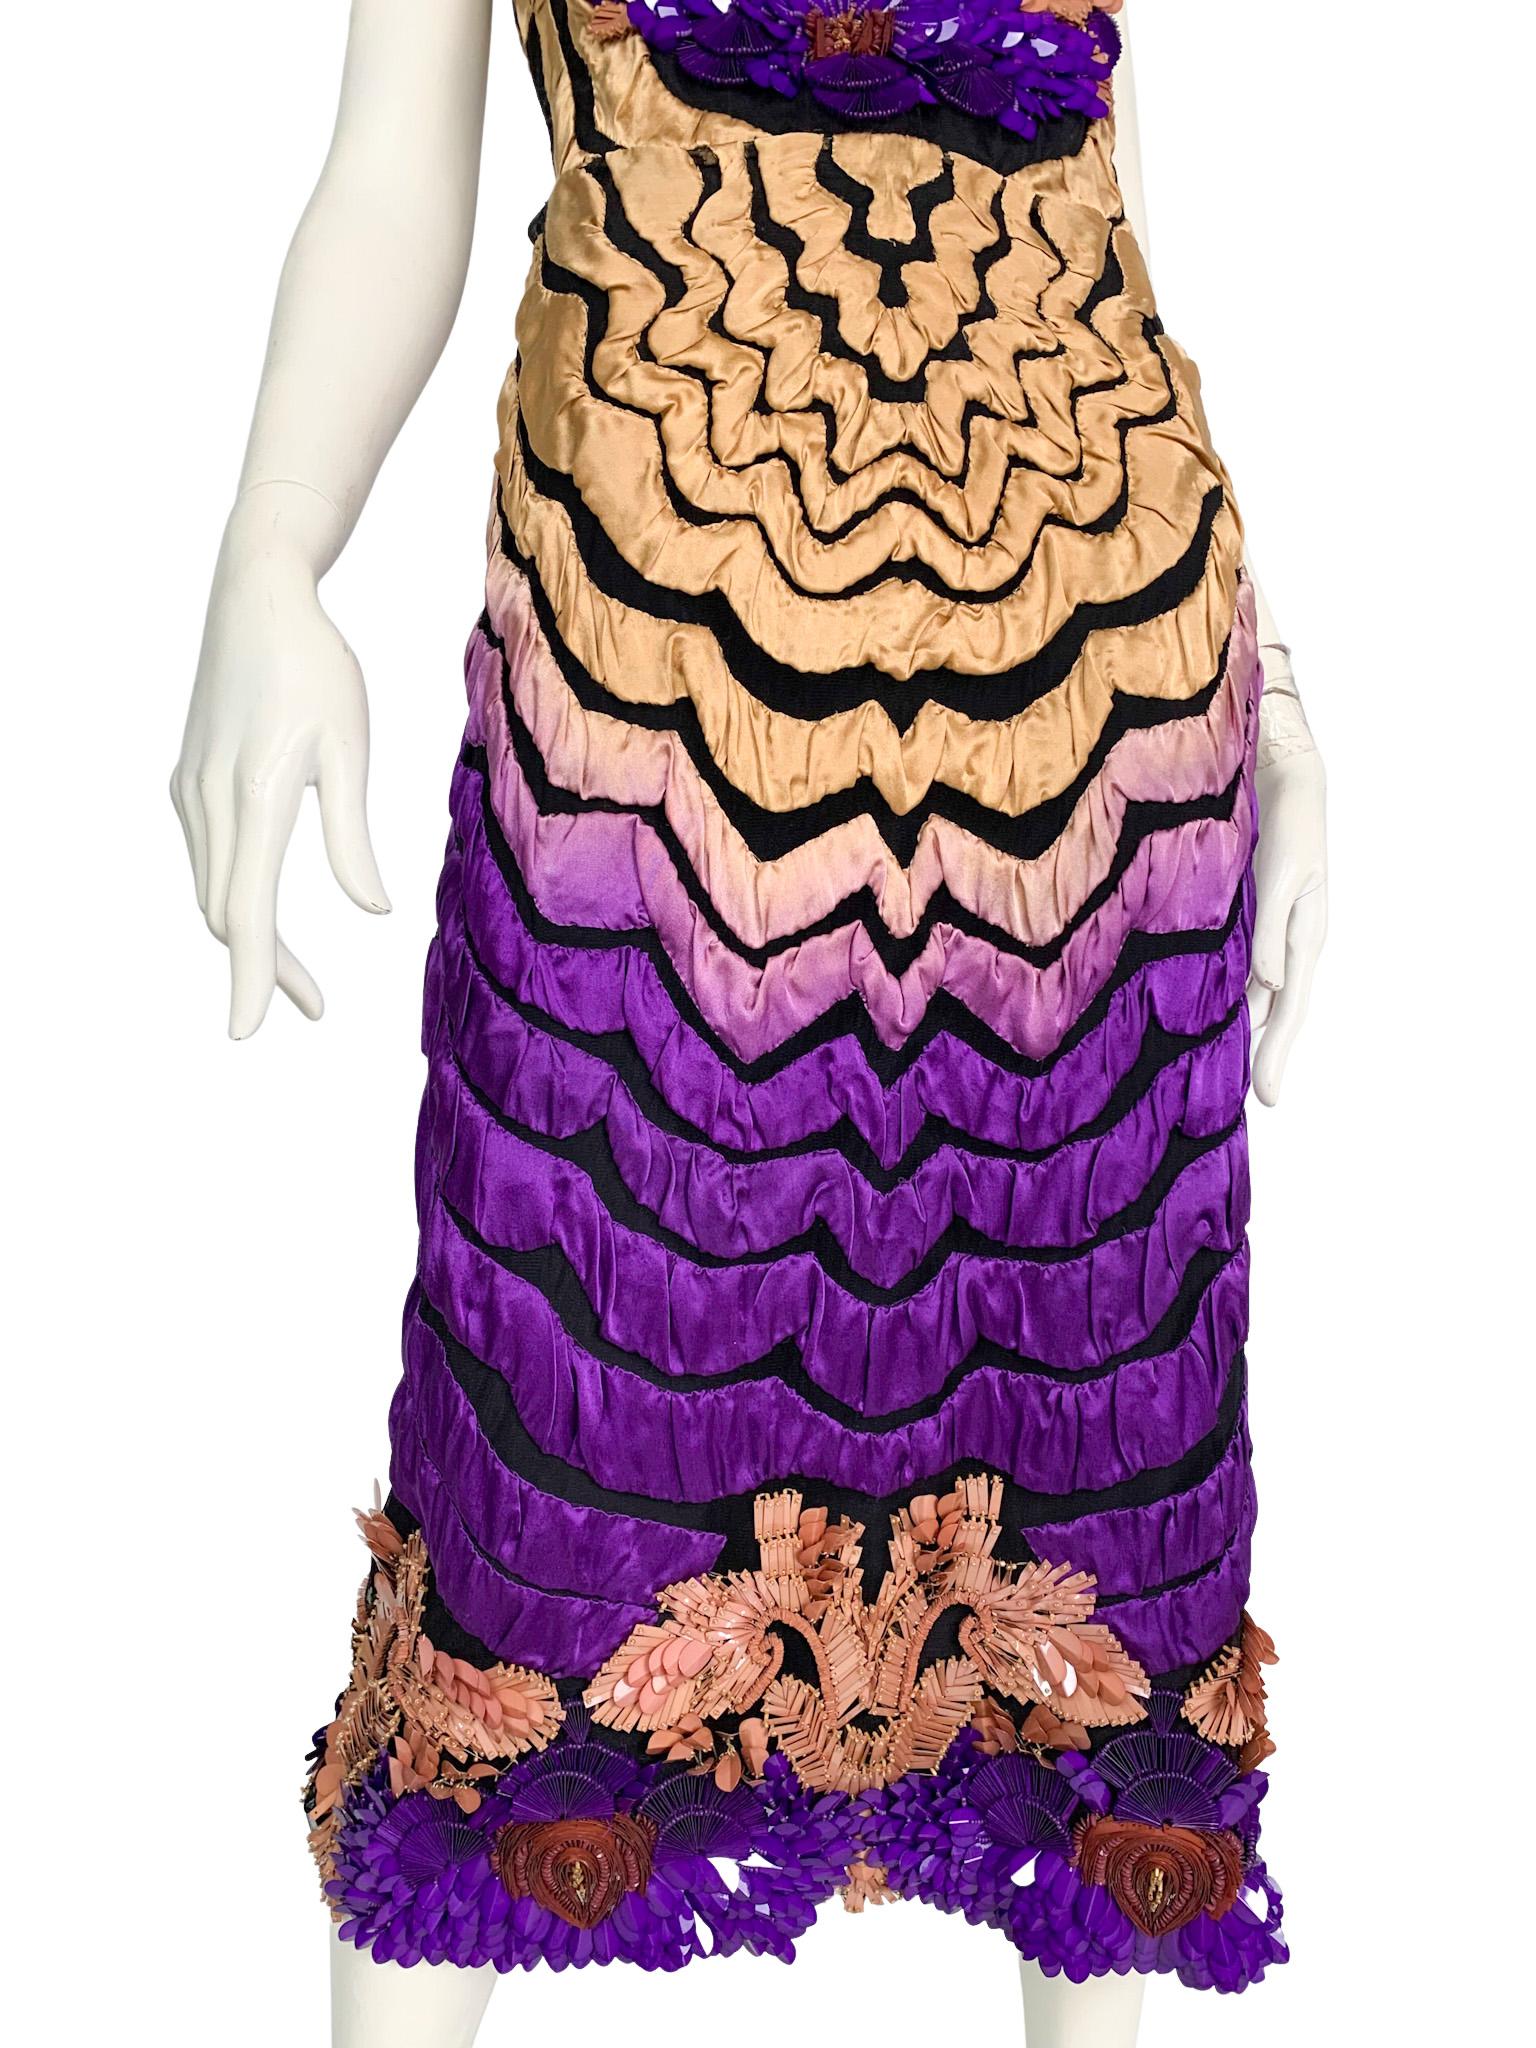 This Alberta Ferretti silk cocktail dress from the pre-fall 2016 collection is designed for a maximum visual impact.
Its wavy pattern is formed by voluminous silk appliques that give depth and texture to the dress, creating a three-dimensional